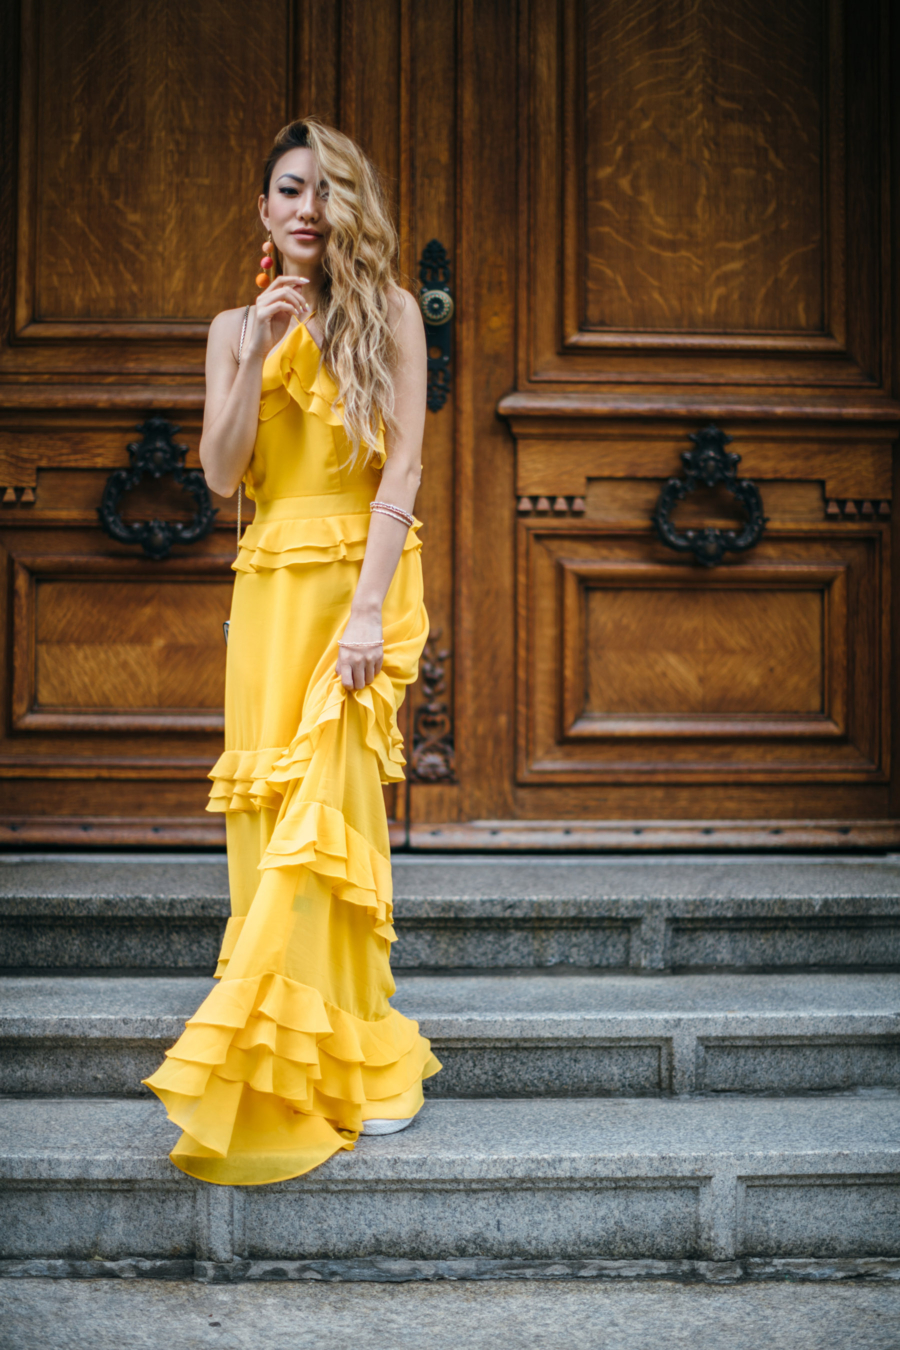 Tiered Ruffle Yellow Dress = 8 Pieces To Achieve The Modern Romantic Look // NotJessFashion.com